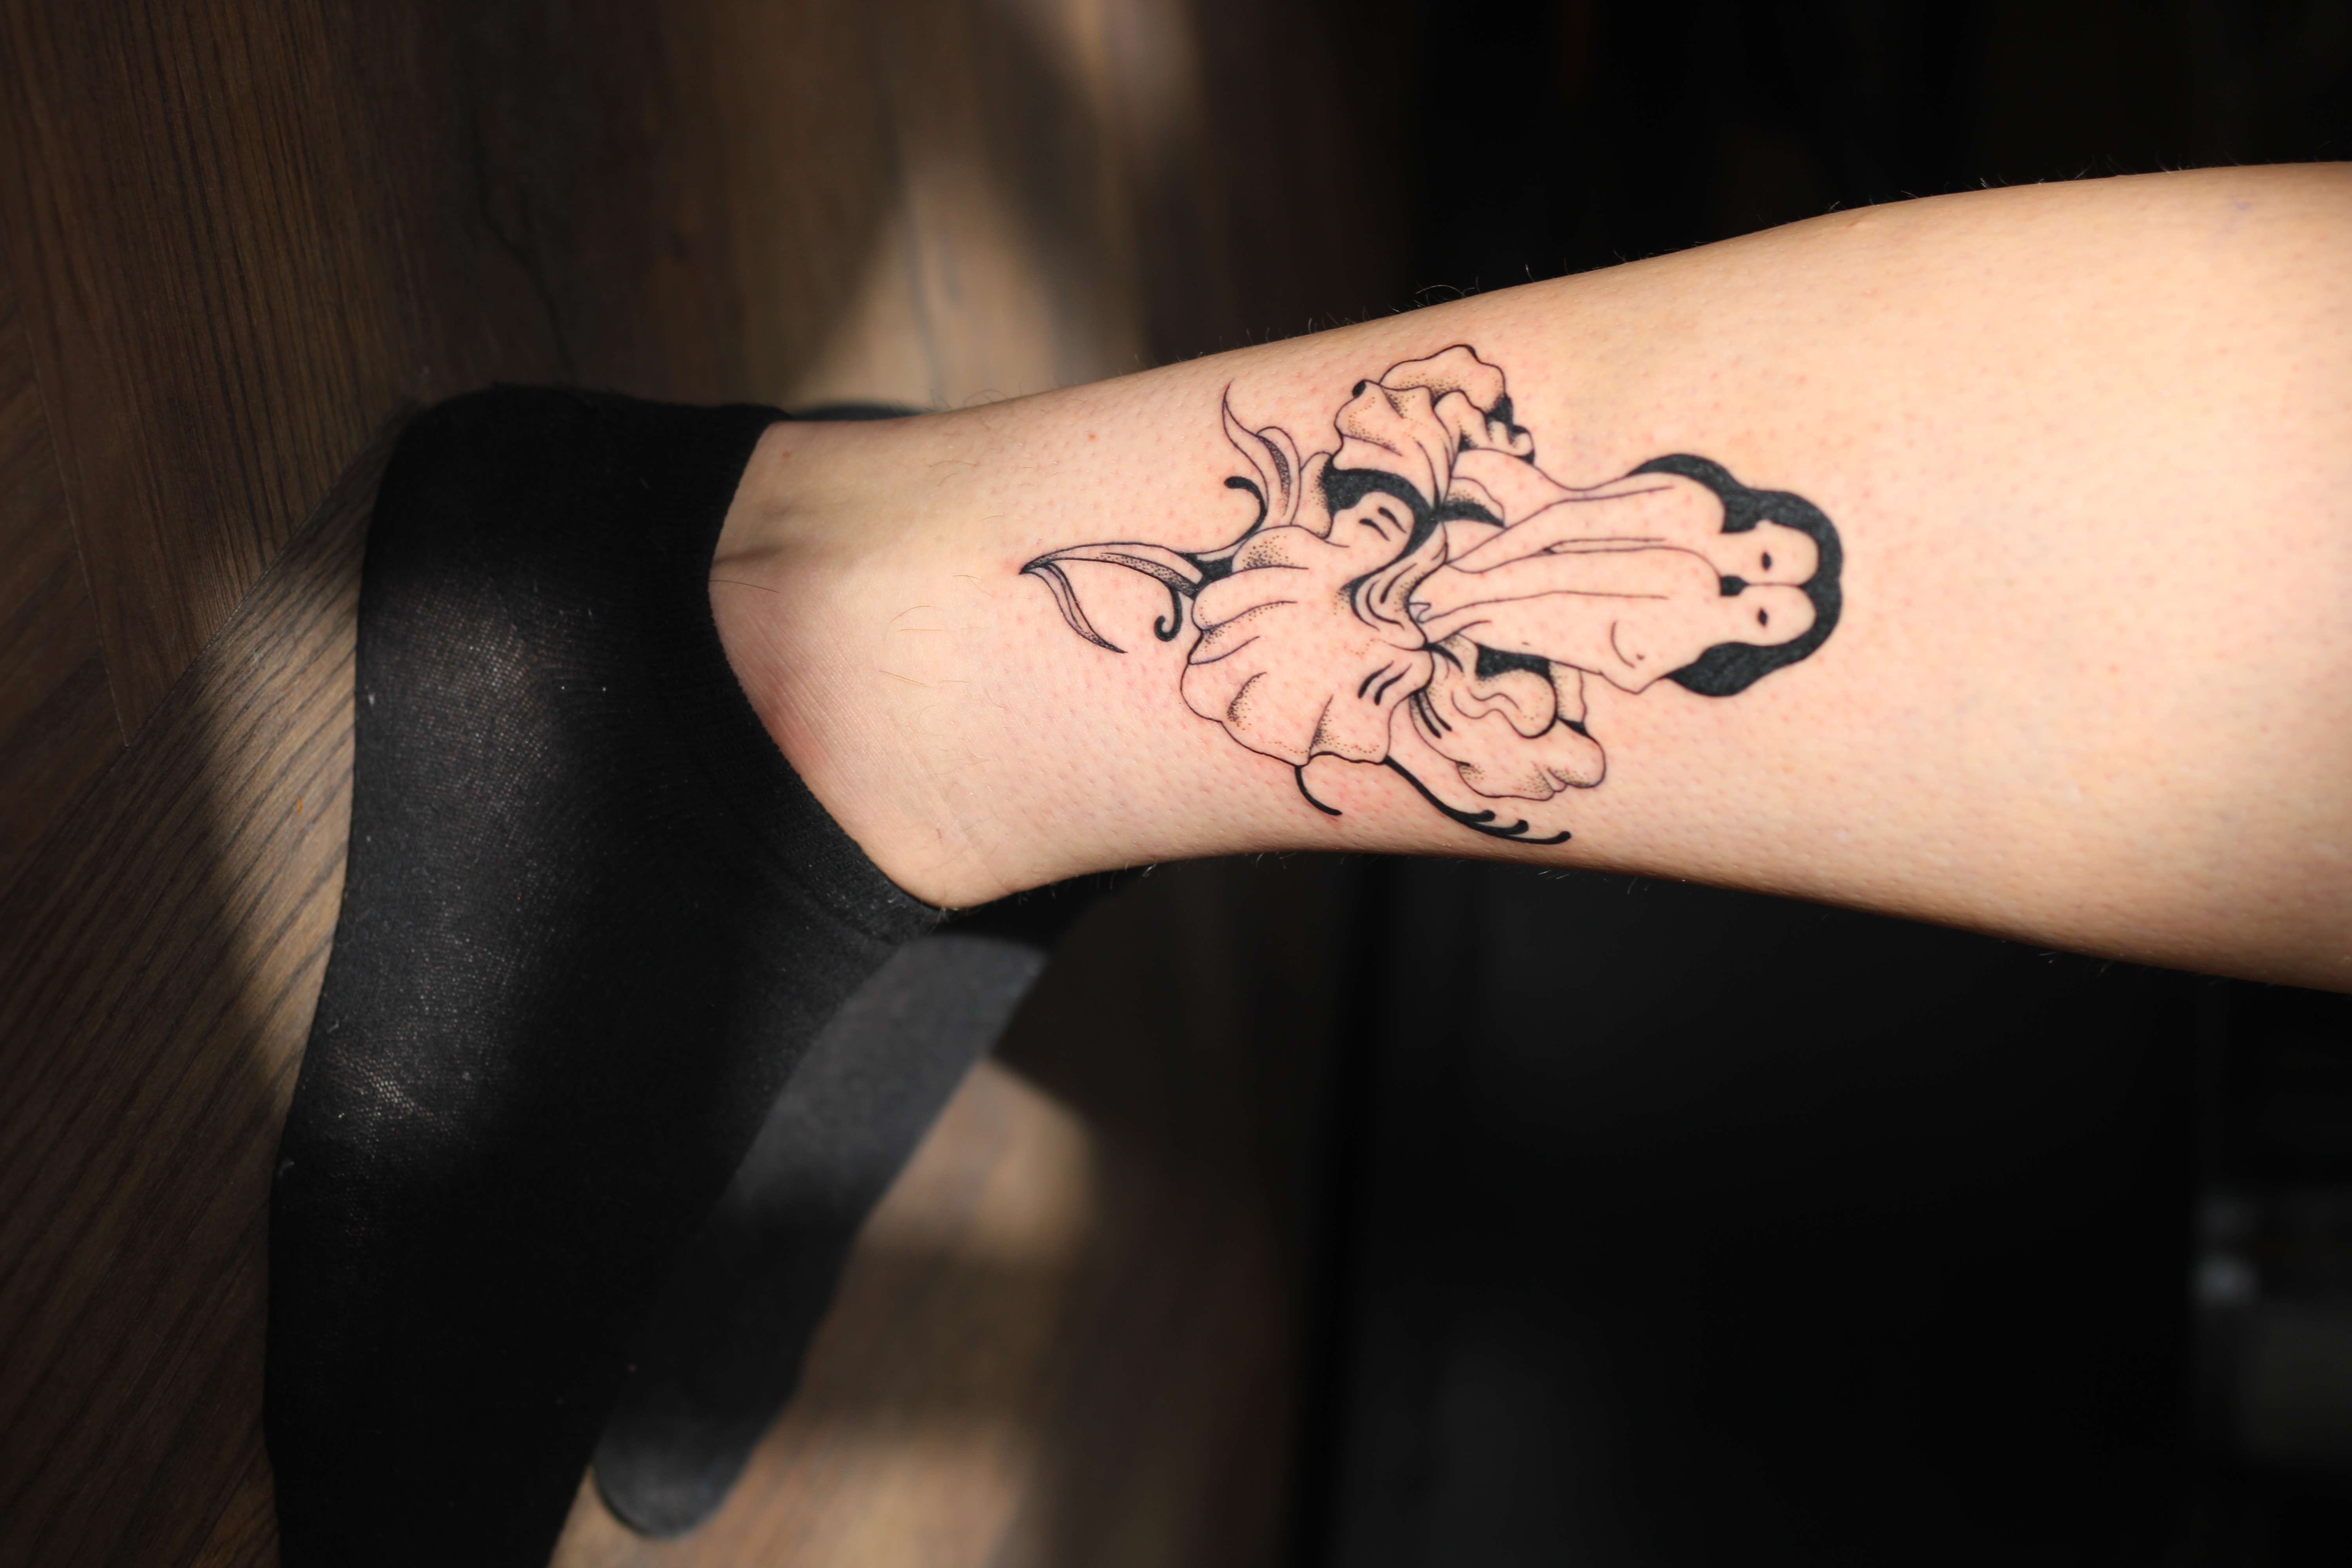 Photo of two feet in black socks and a calve with a black tattoo of two women in a flower